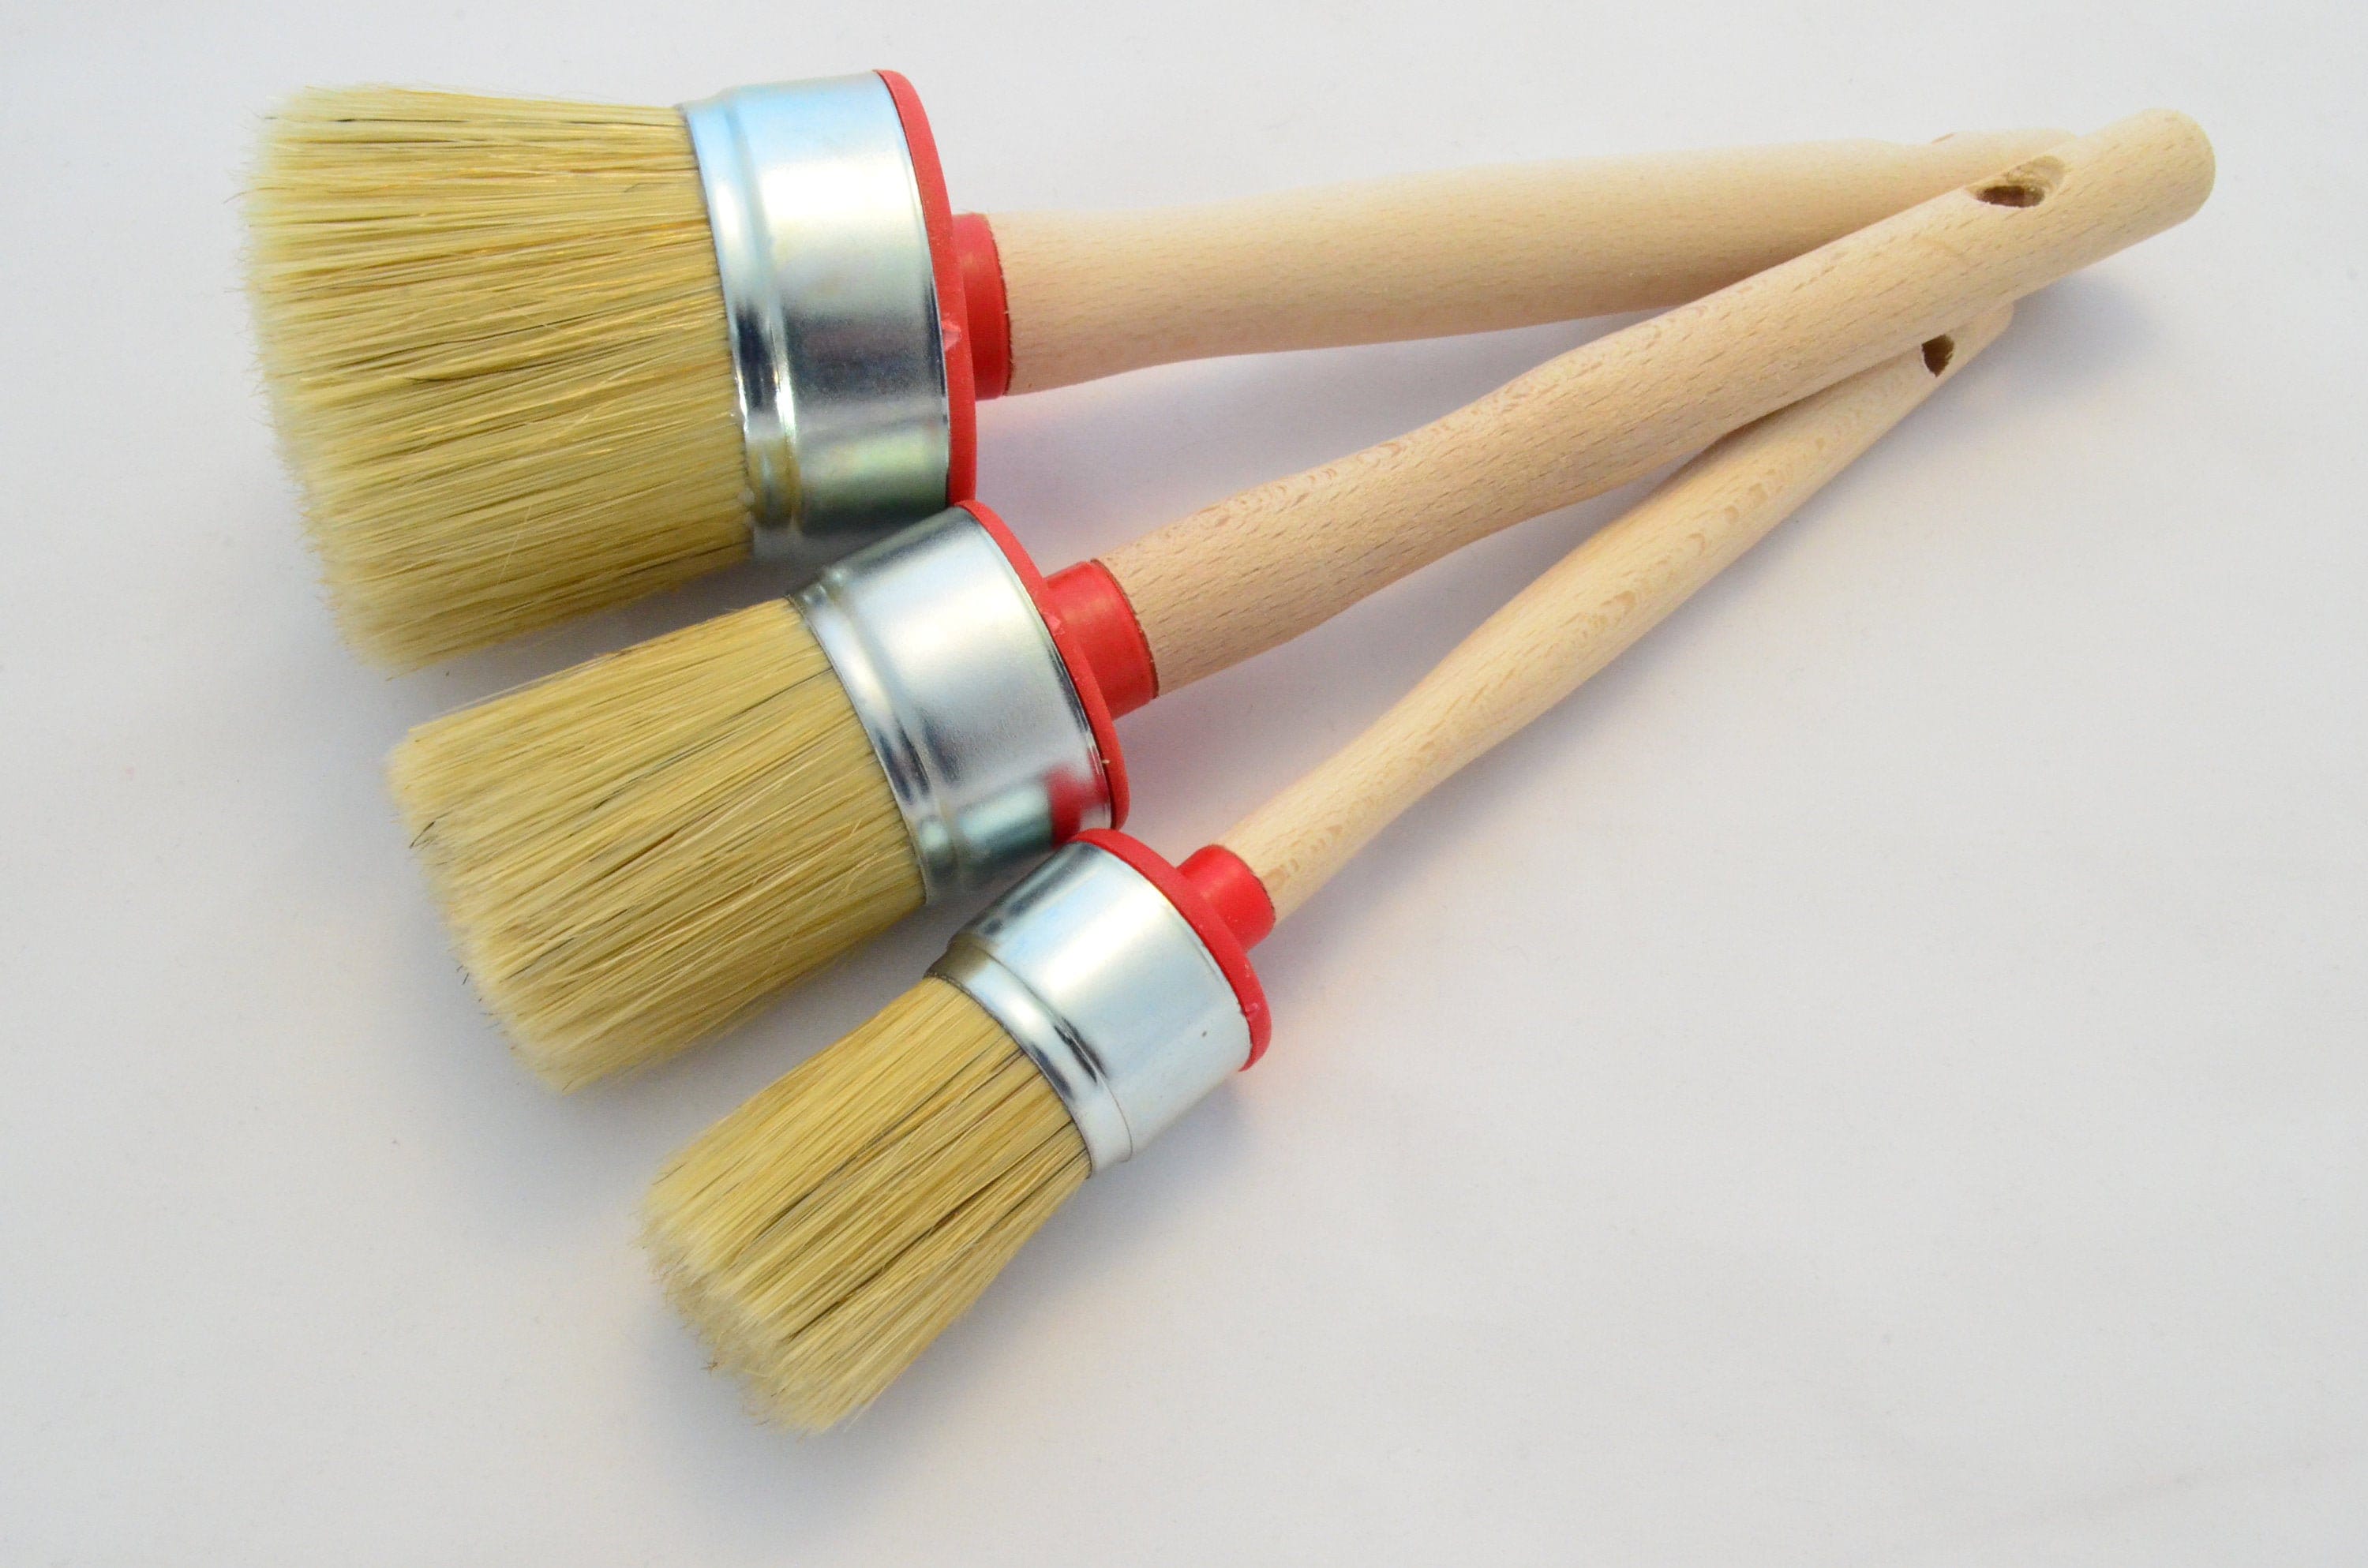 Chalk and Wax Paint Brush, Large 2-in-1 Round Natural Bristles Painting  Tool for DIY Furniture, Stencils, Home Decor, Wood Projects, Wax Finishing  1 Pack